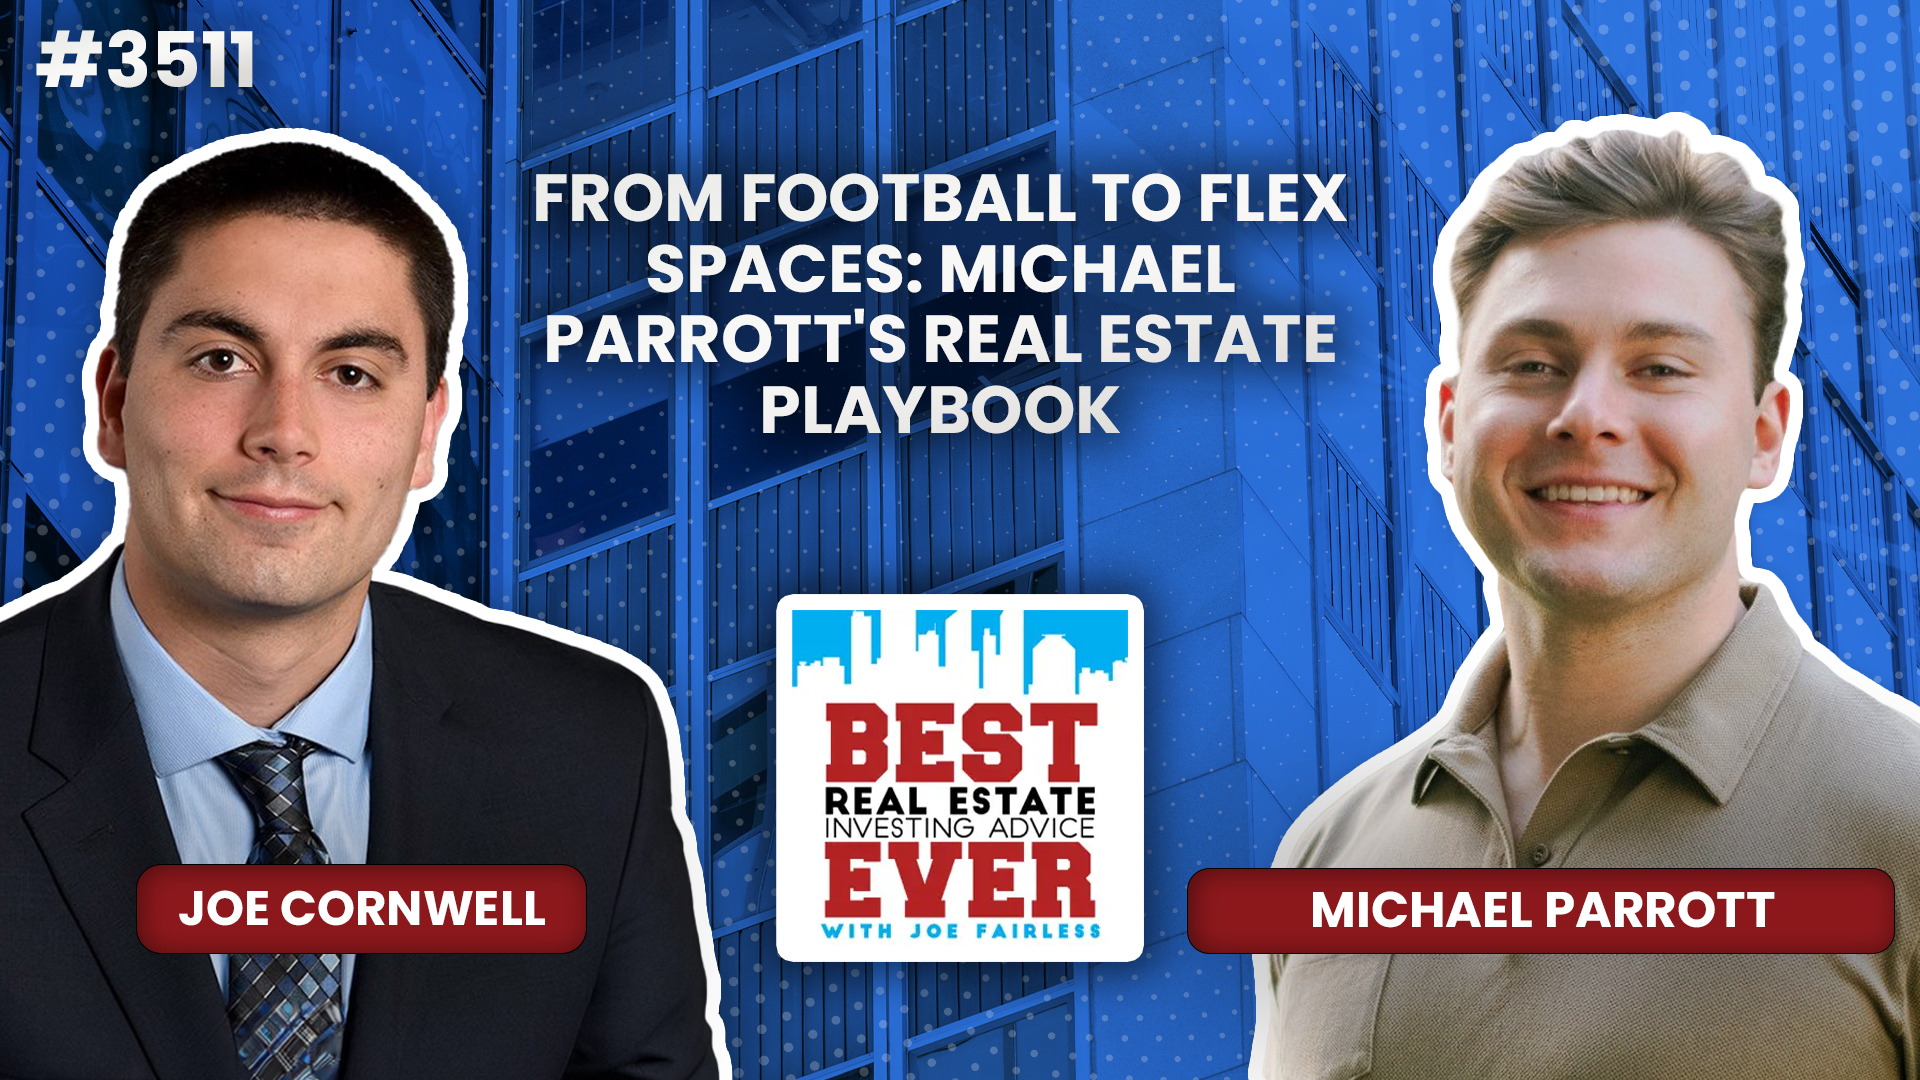 JF3511: From Football to Flex Spaces: Michael Parrott's Real Estate Playbook